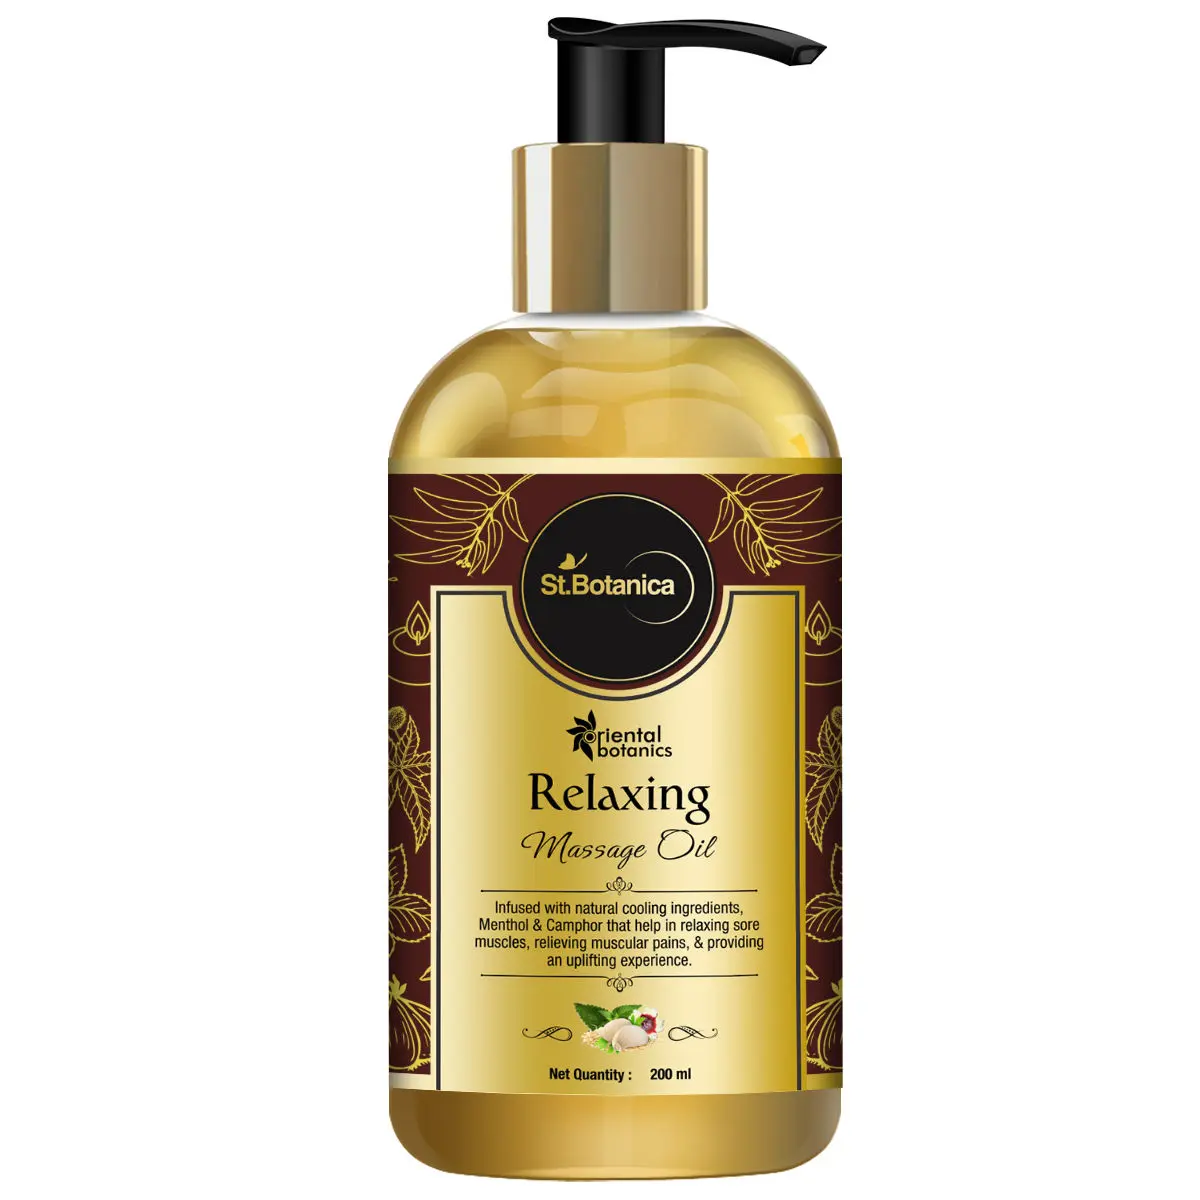 Oriental Botanics Relaxing Body Massage Oil For Pain Relief in Back, Legs, Arms, Knee, Body - 200ml